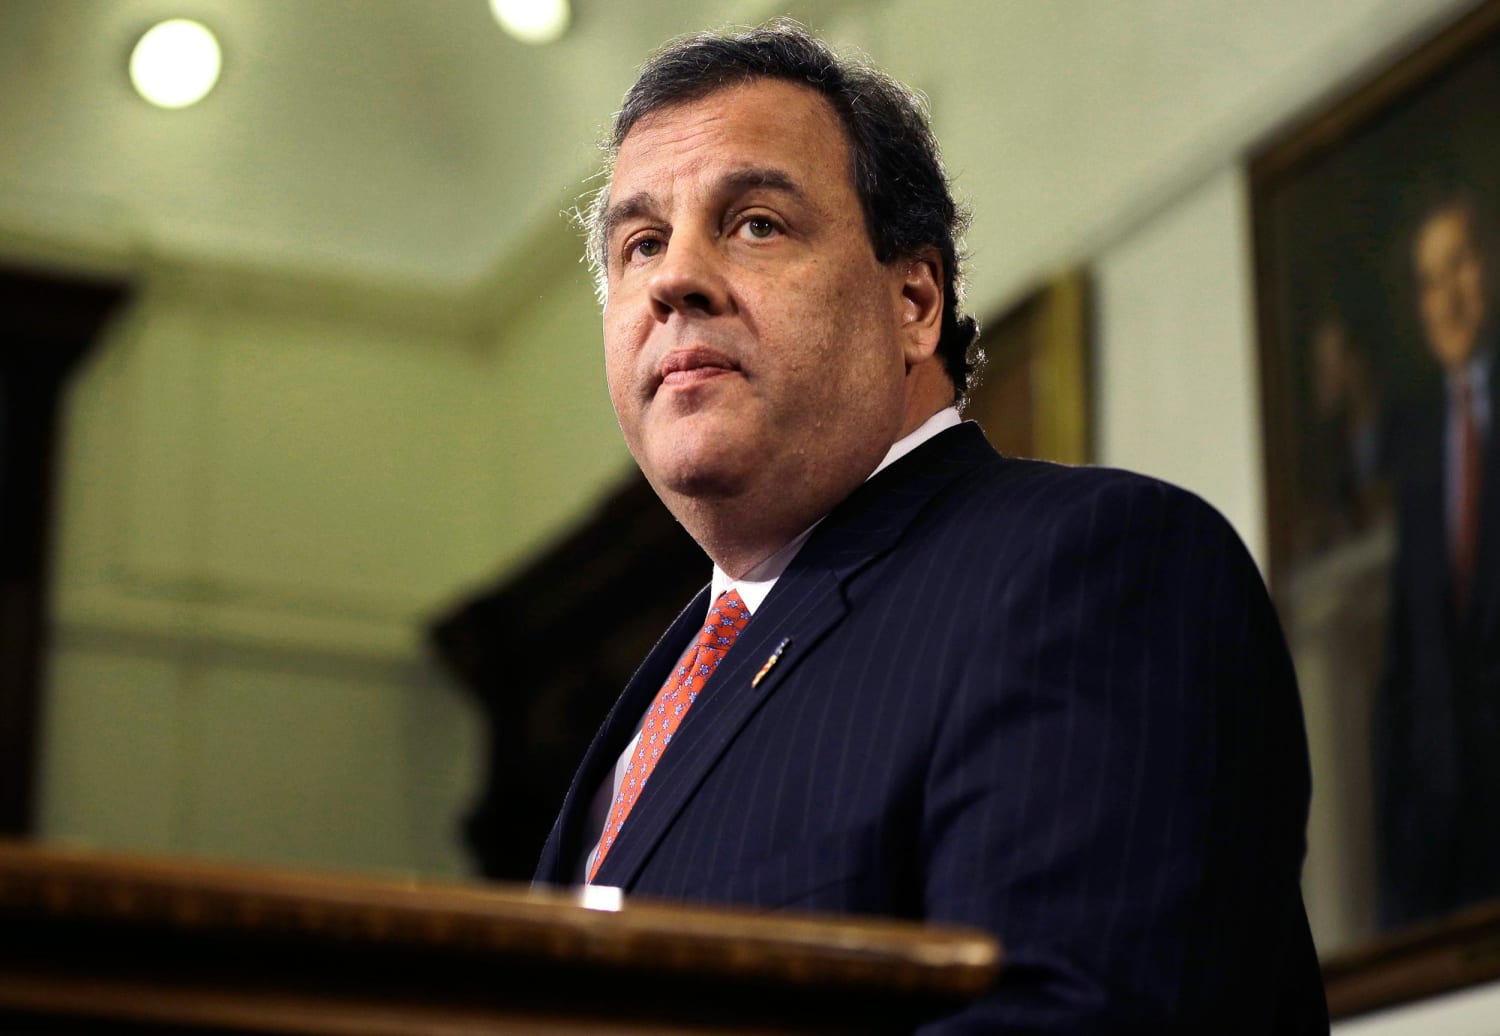 Chris Christie defends his weight after Barbara Walters 